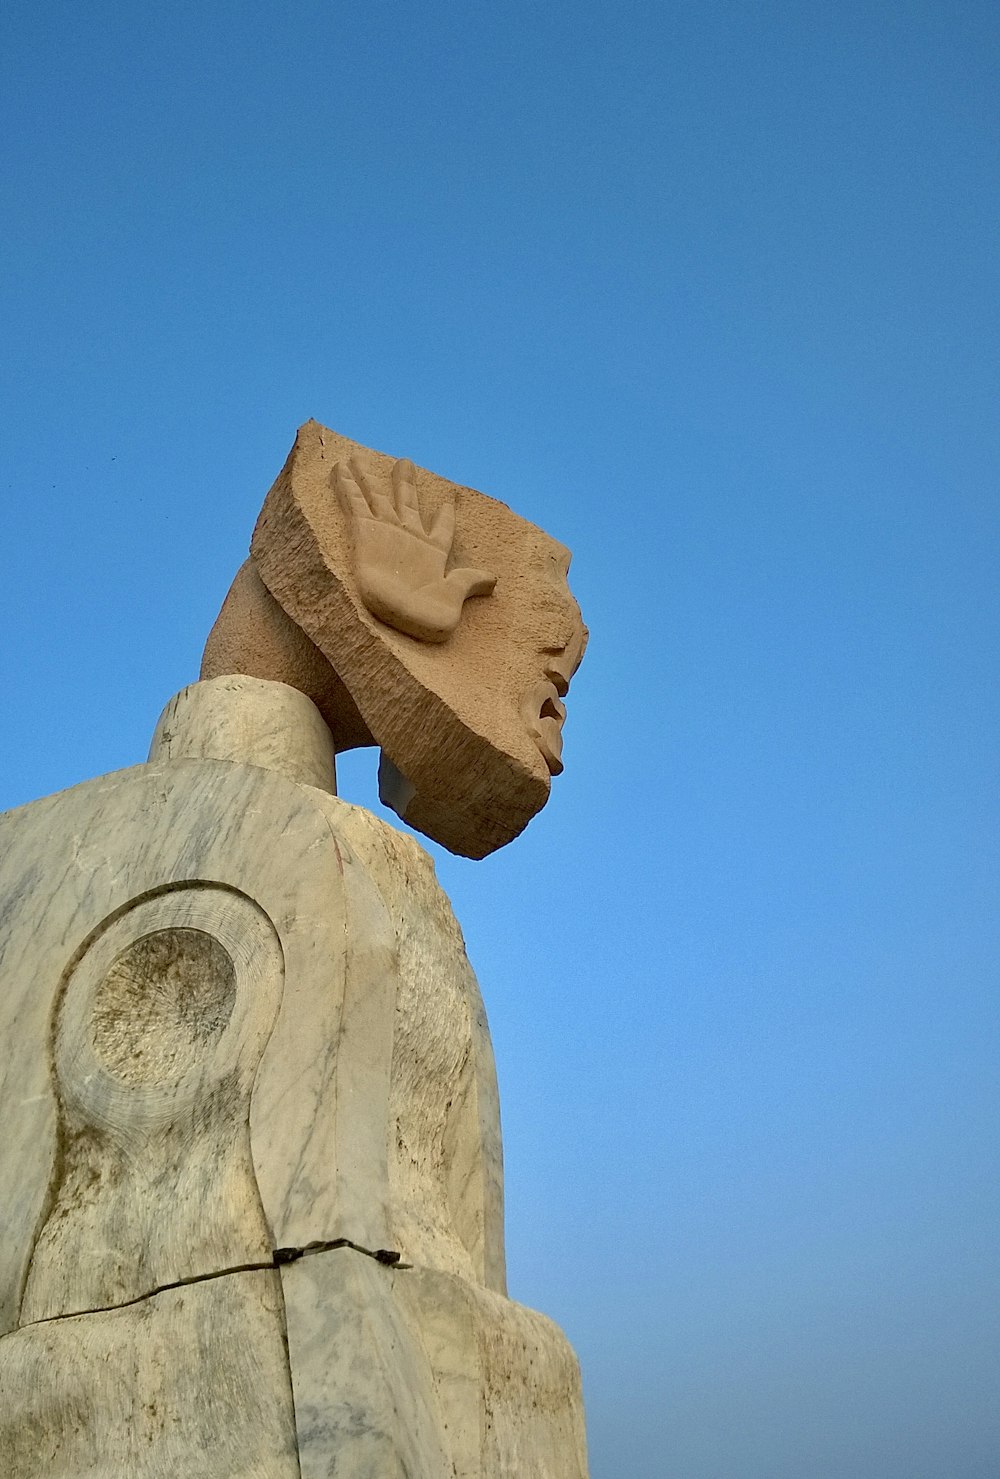 a statue of a head on top of a rock